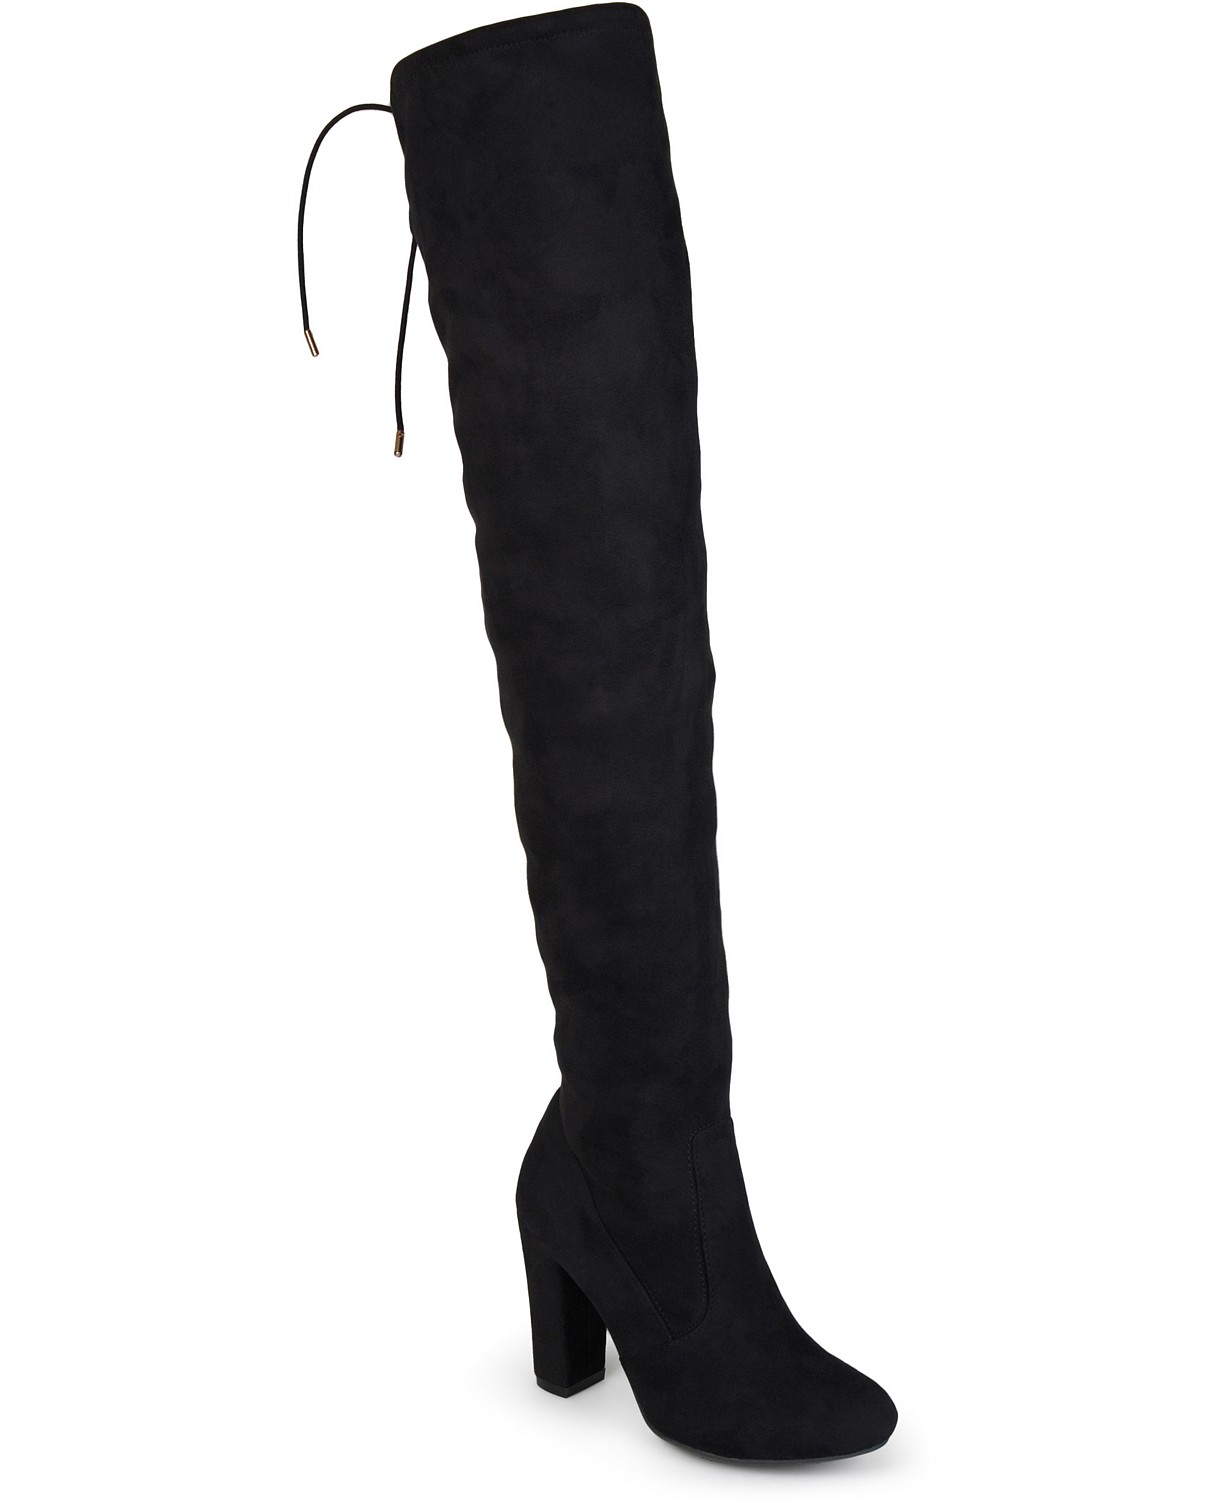 www.couturepoint.com-journee-collection-womens-black-trill-lace-up-over-the-knee-boots-copy